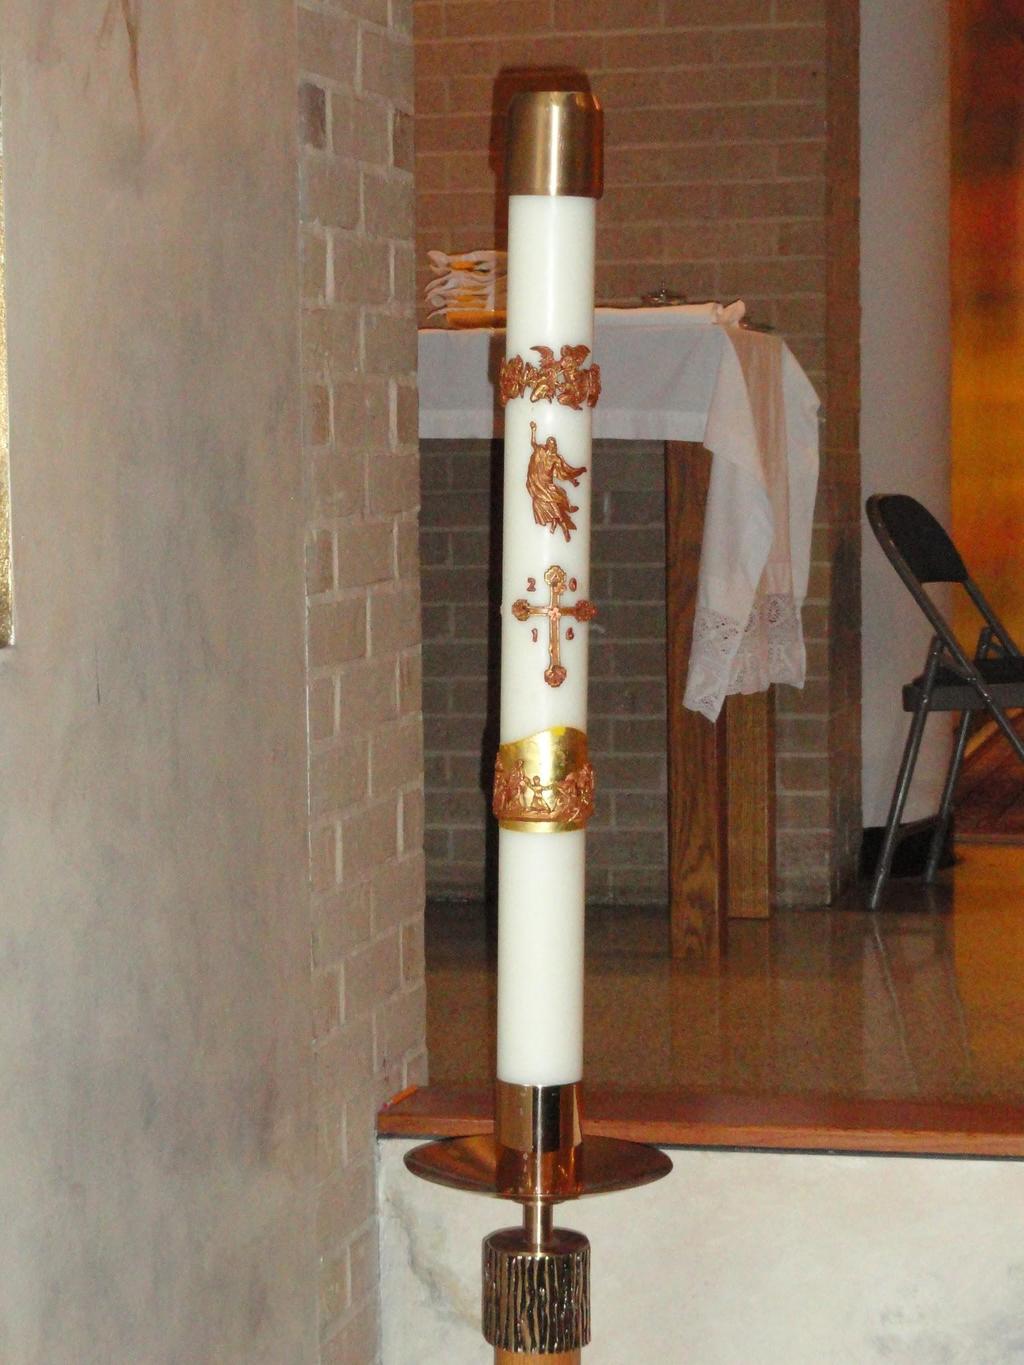 Paschal Candle A new Paschal candle is blessed and lit every year at Easter, and is used throughout the Paschal